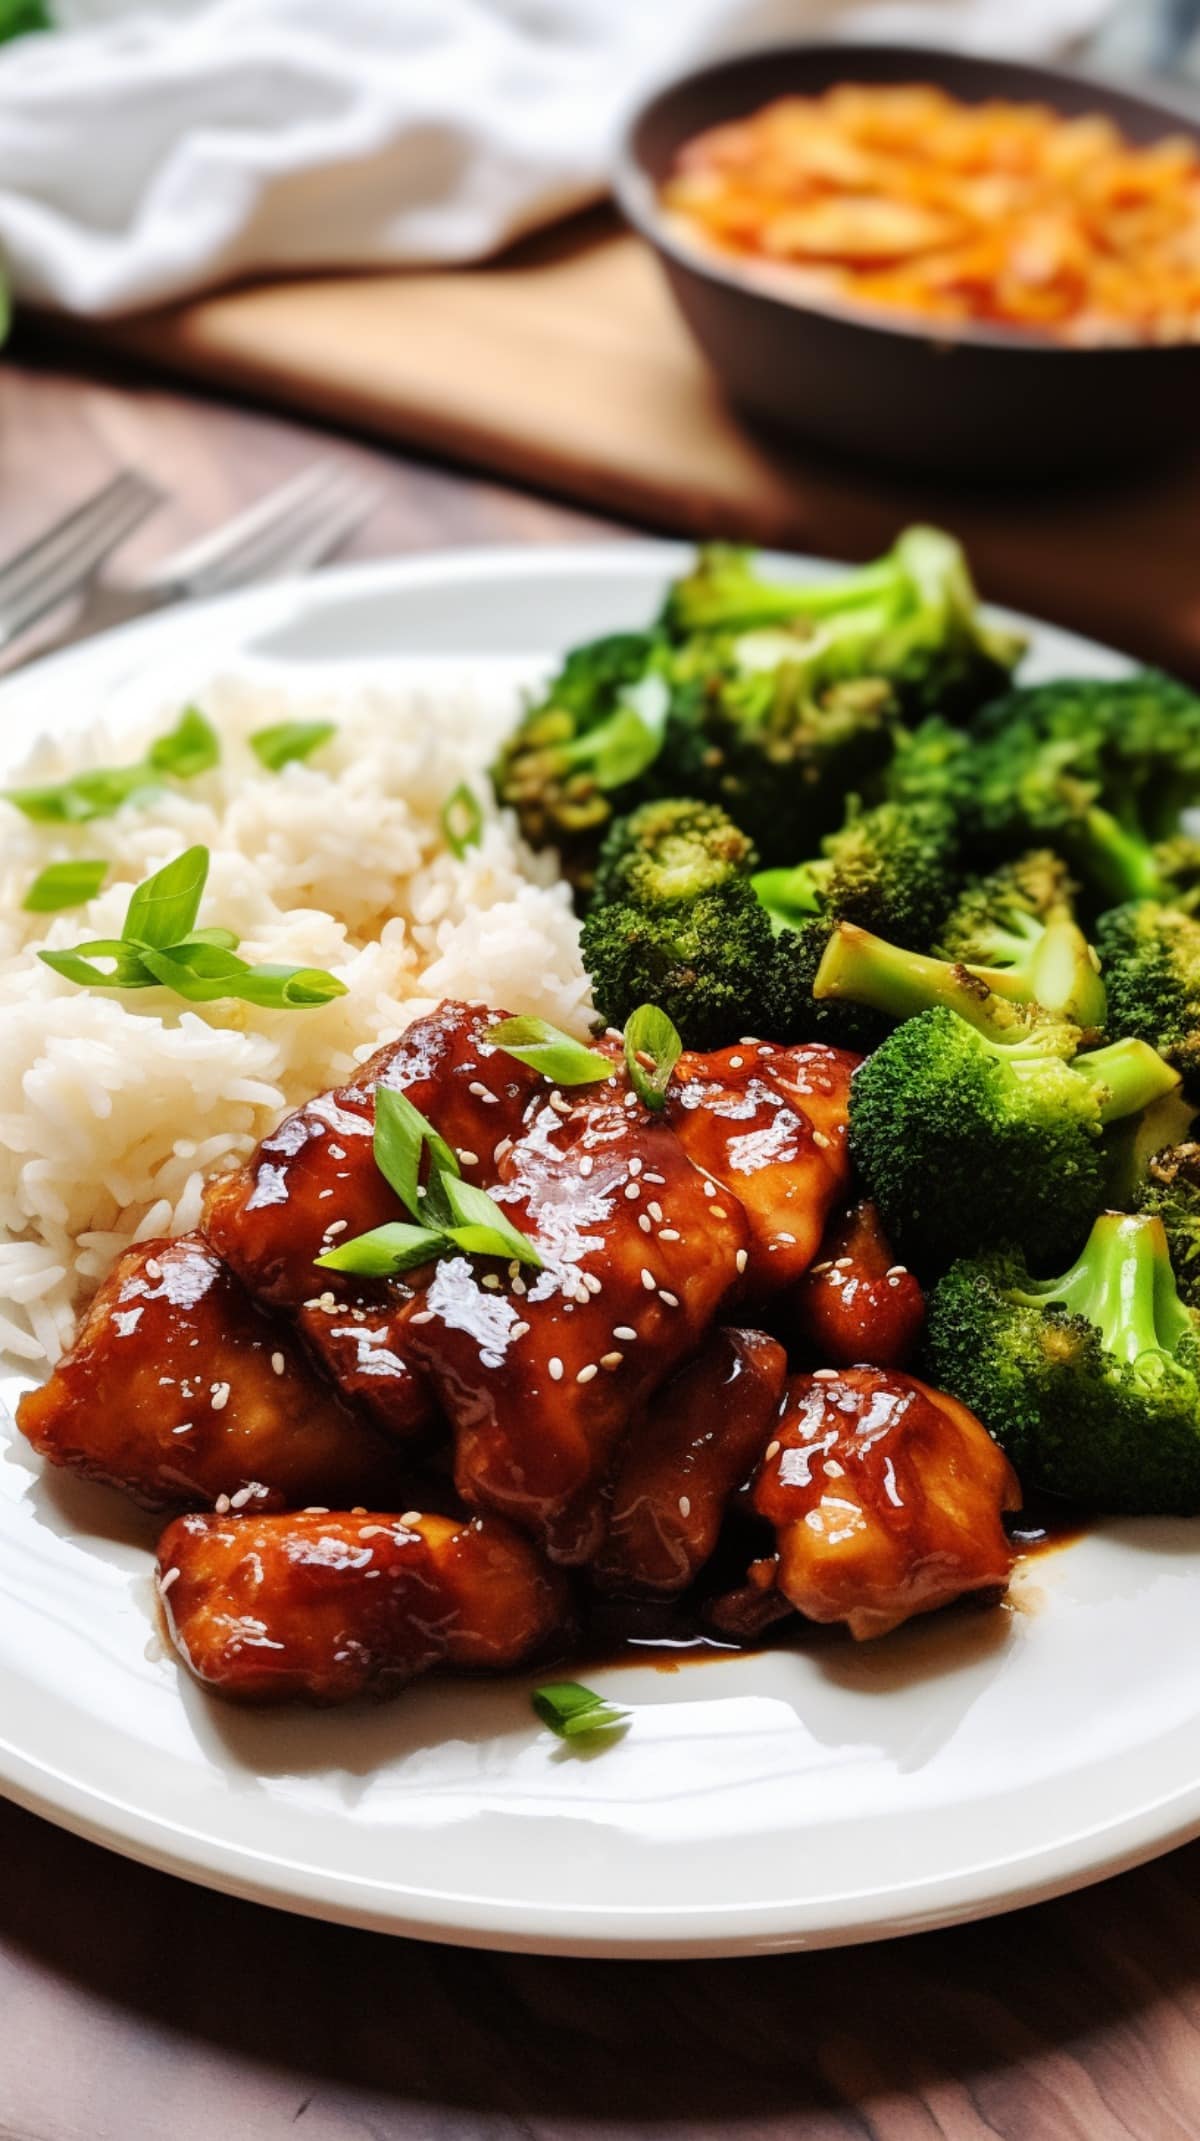 Slow Cooker Honey Garlic Chicken with rice and broccoli